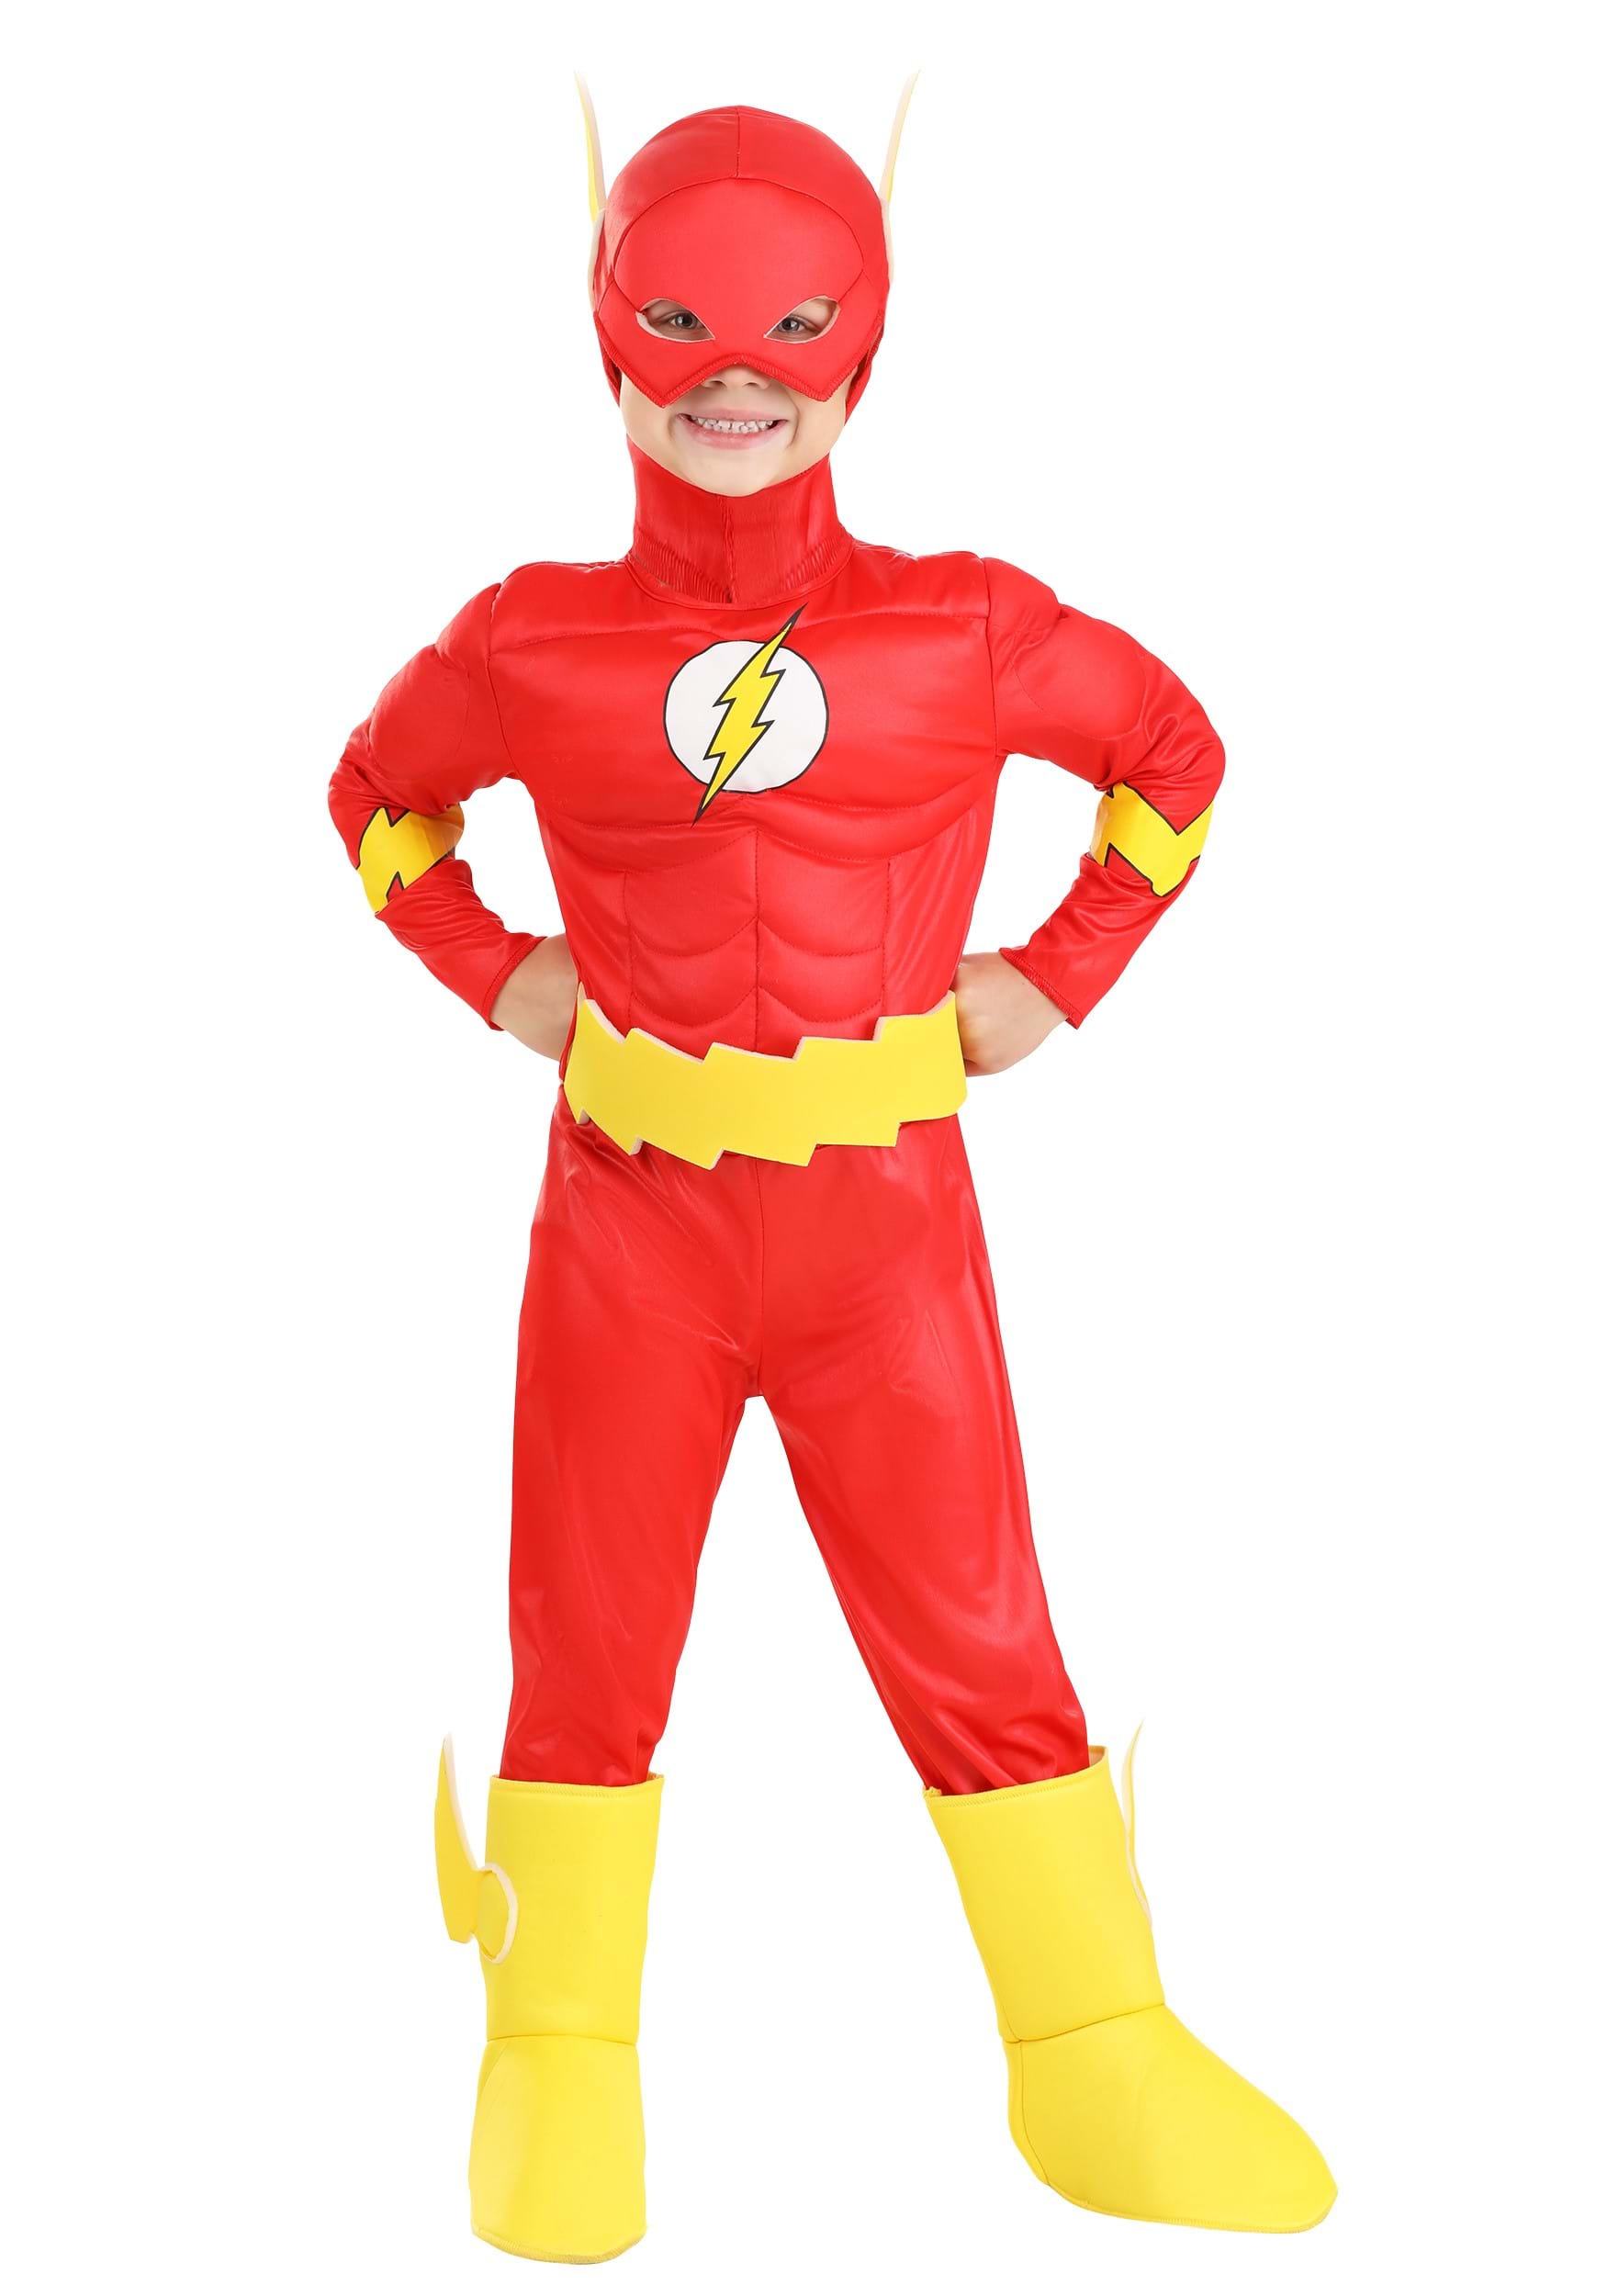 Photos - Fancy Dress Deluxe Jerry Leigh  Toddler Classic Flash Costume Red/Yellow JLJLF10019 